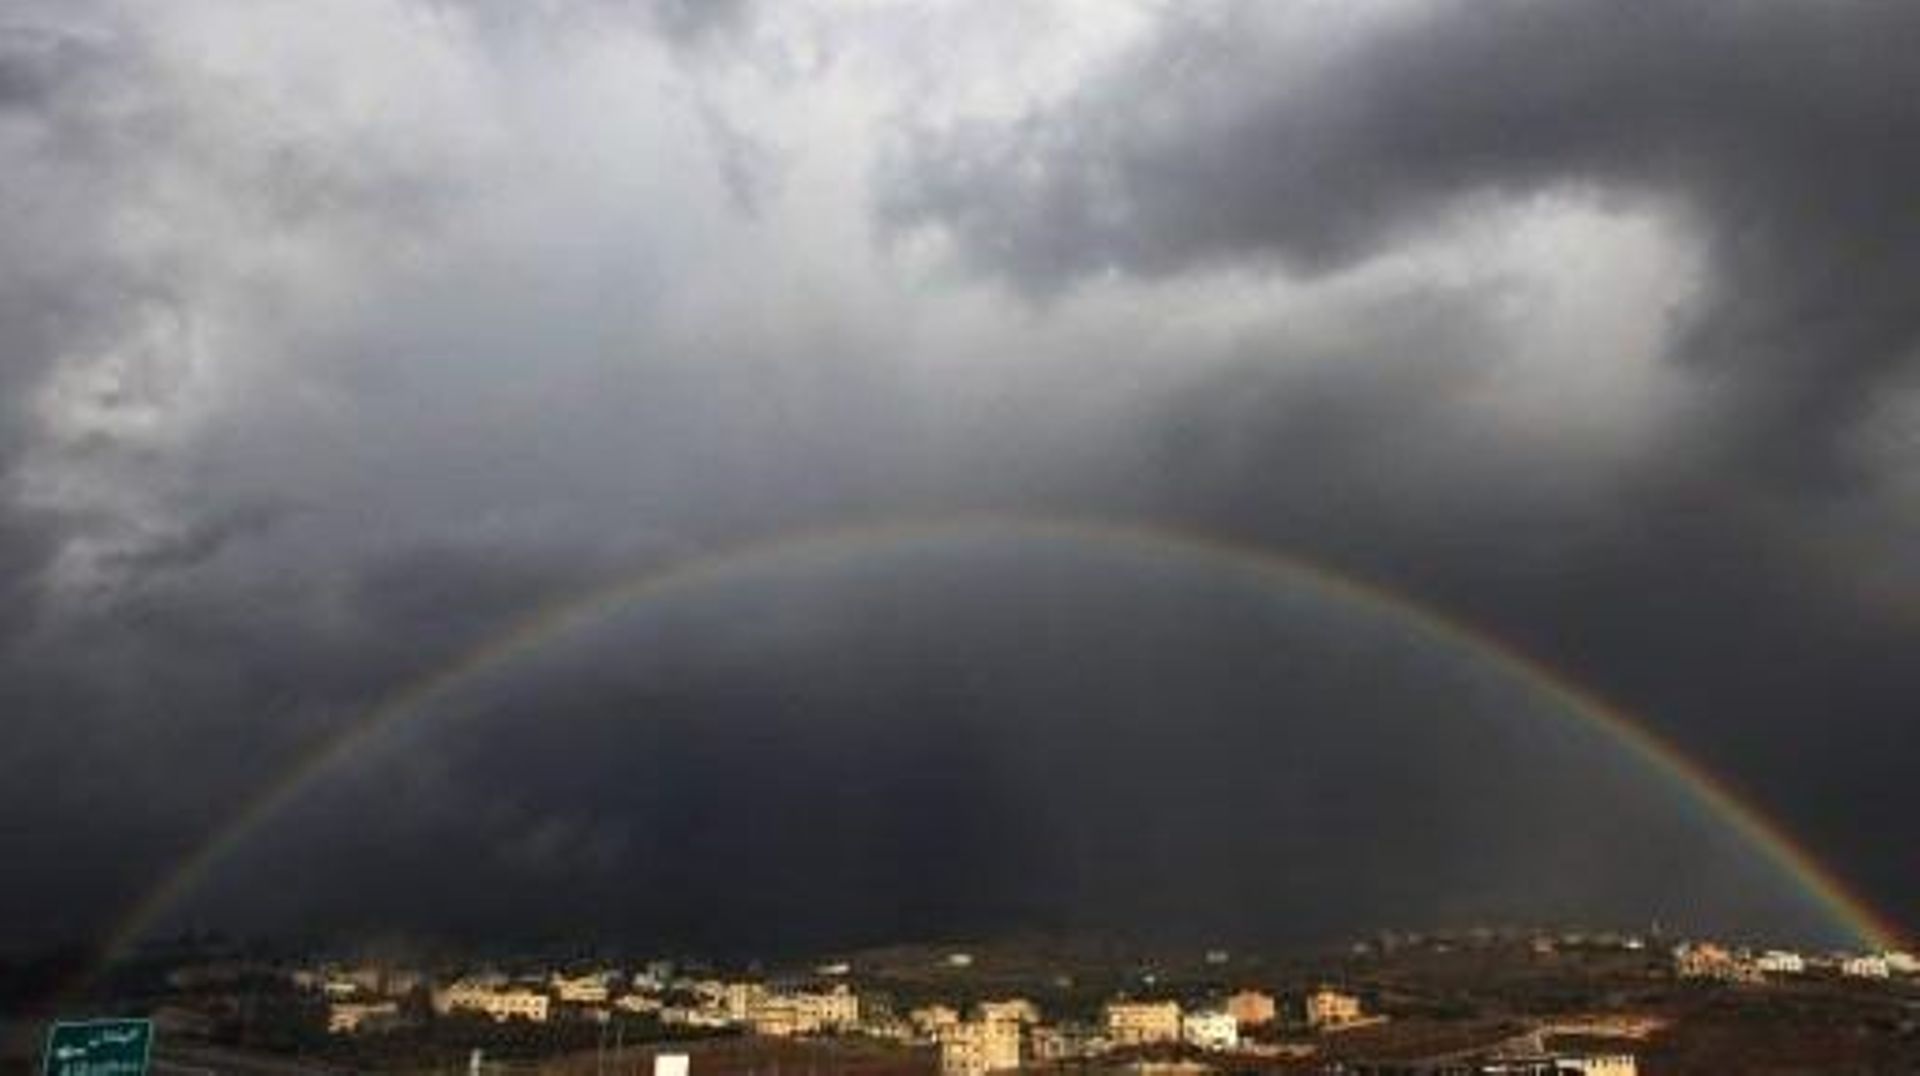 TOPSHOT – A rainbow is seen East of the West Bank city of Nablus on January 2, 2016. AFP PHOTO / JAAFAR ASHTIYEH / AFP PHOTO / JAAFAR ASHTIYEH